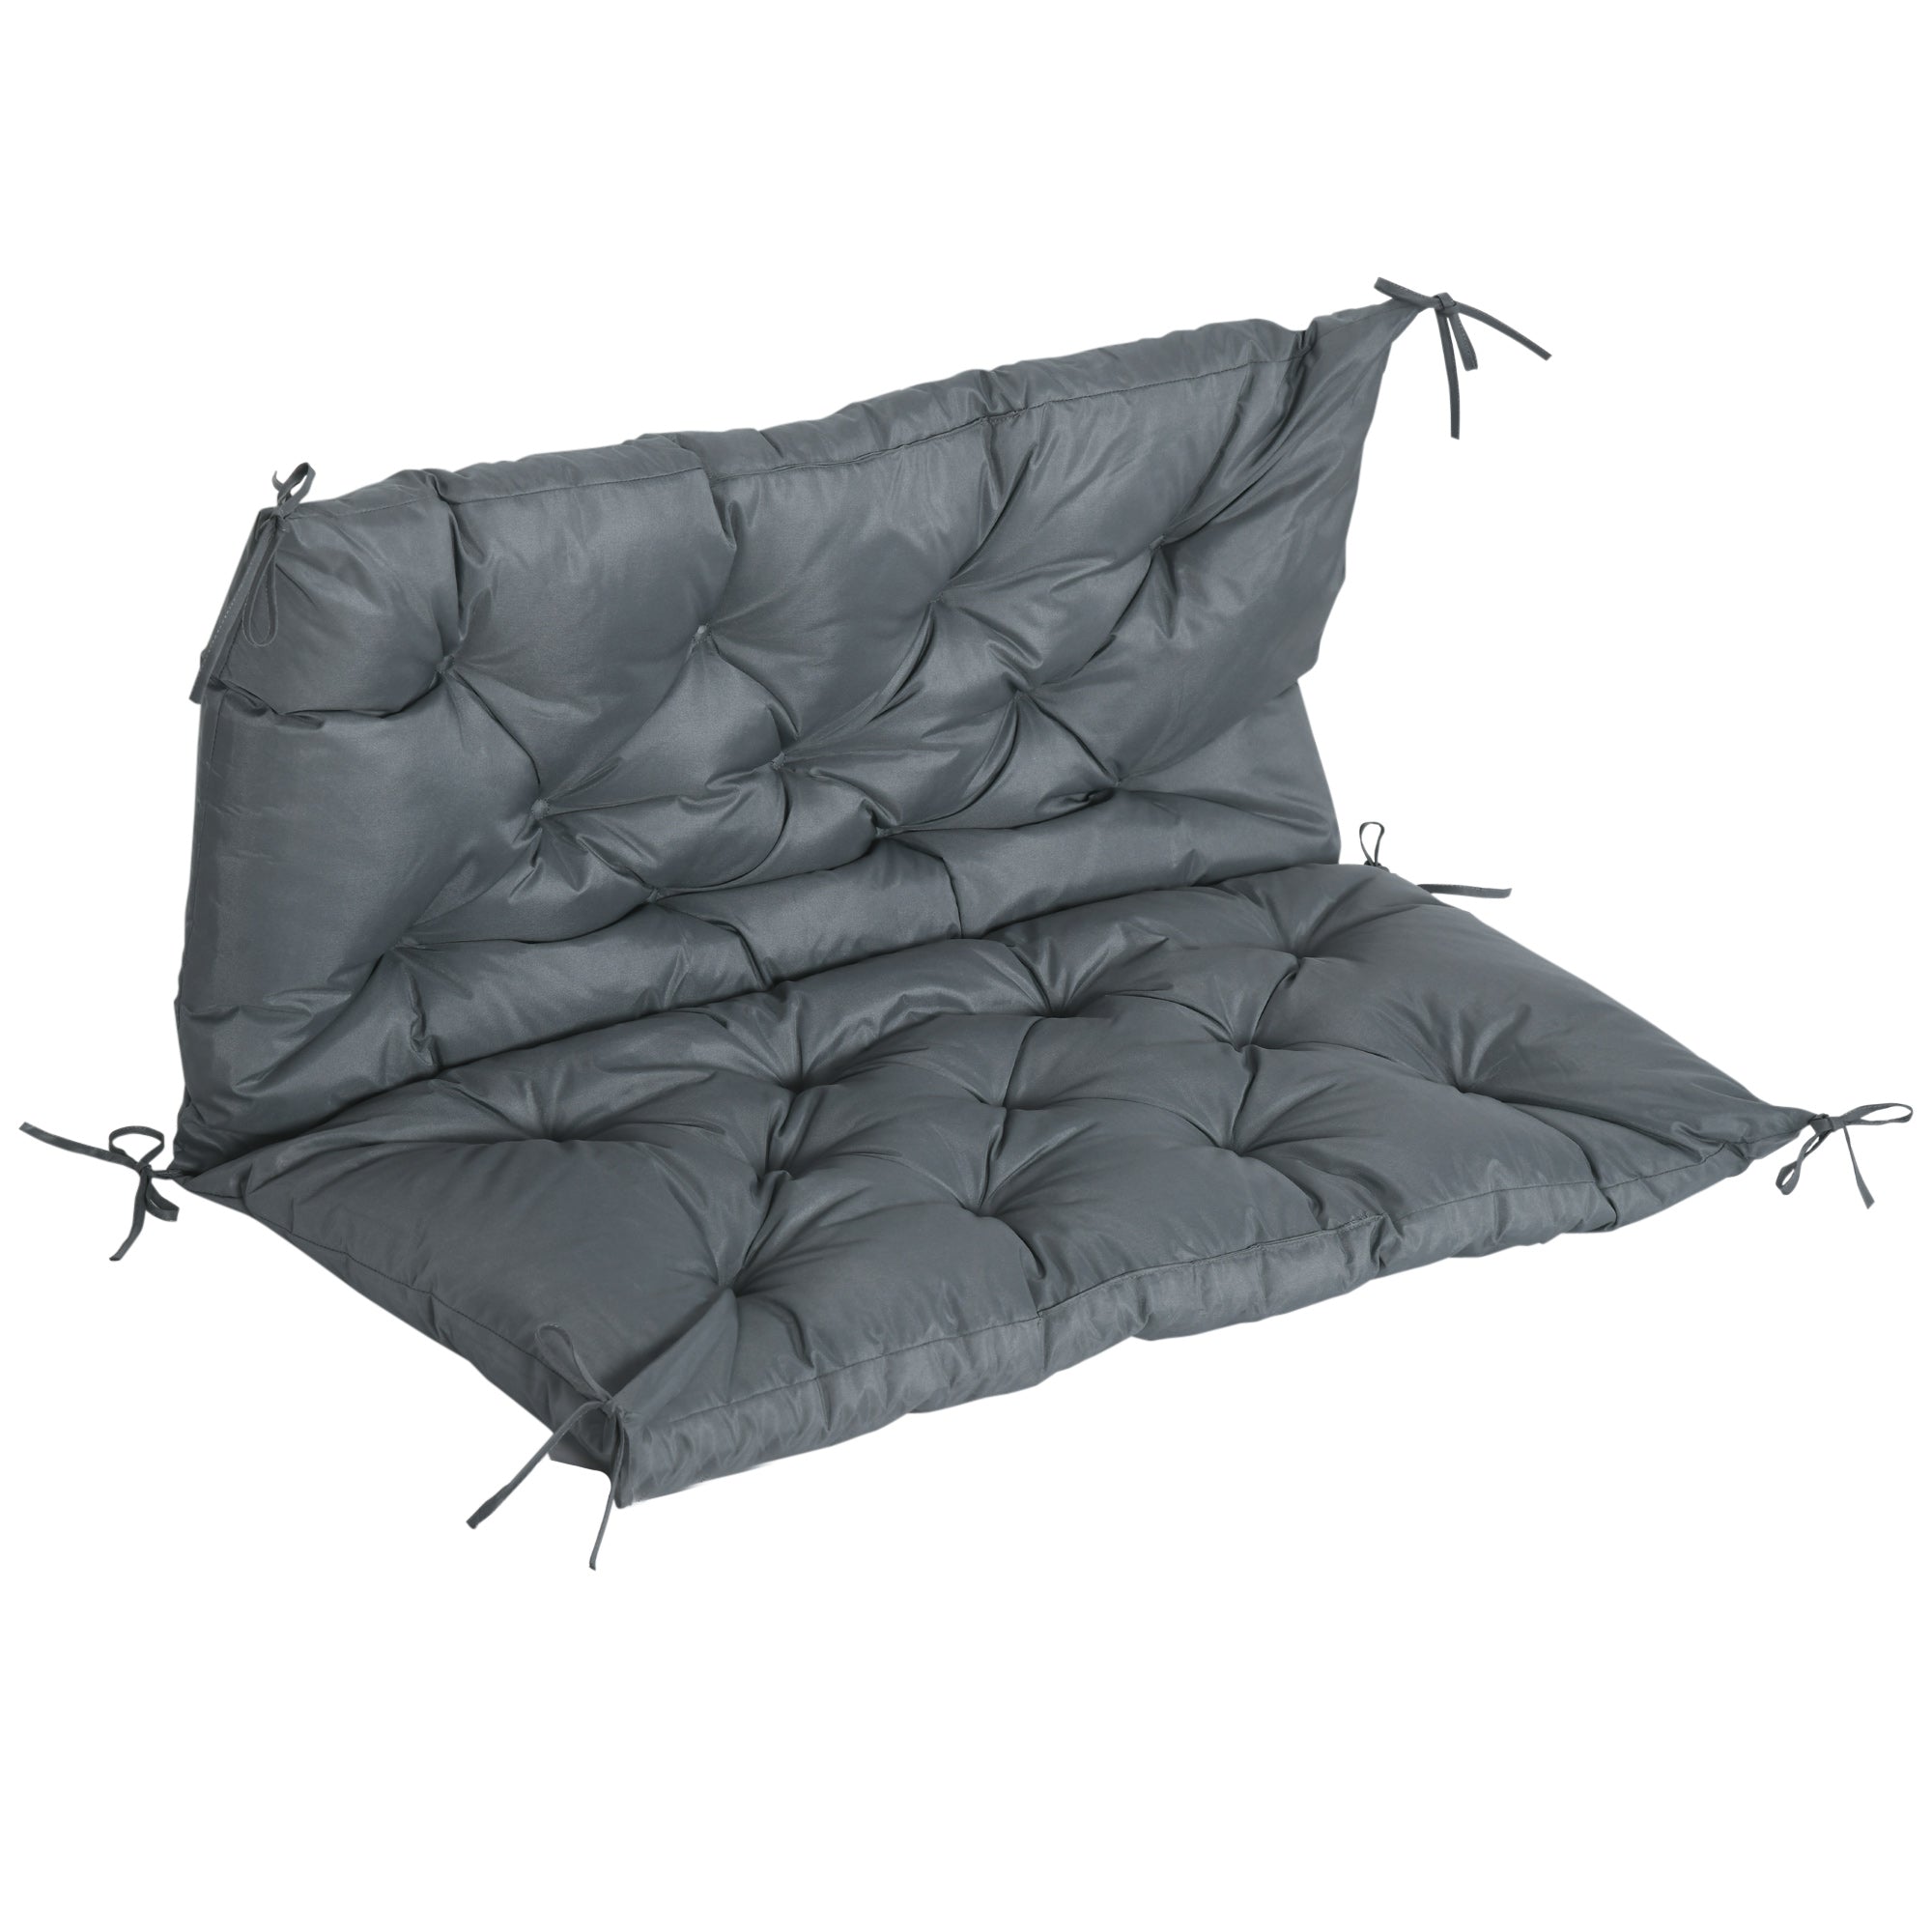 Outsunny 2 Seater Garden Bench Cushion Outdoor Seat Pad with Ties Dark Grey  | TJ Hughes